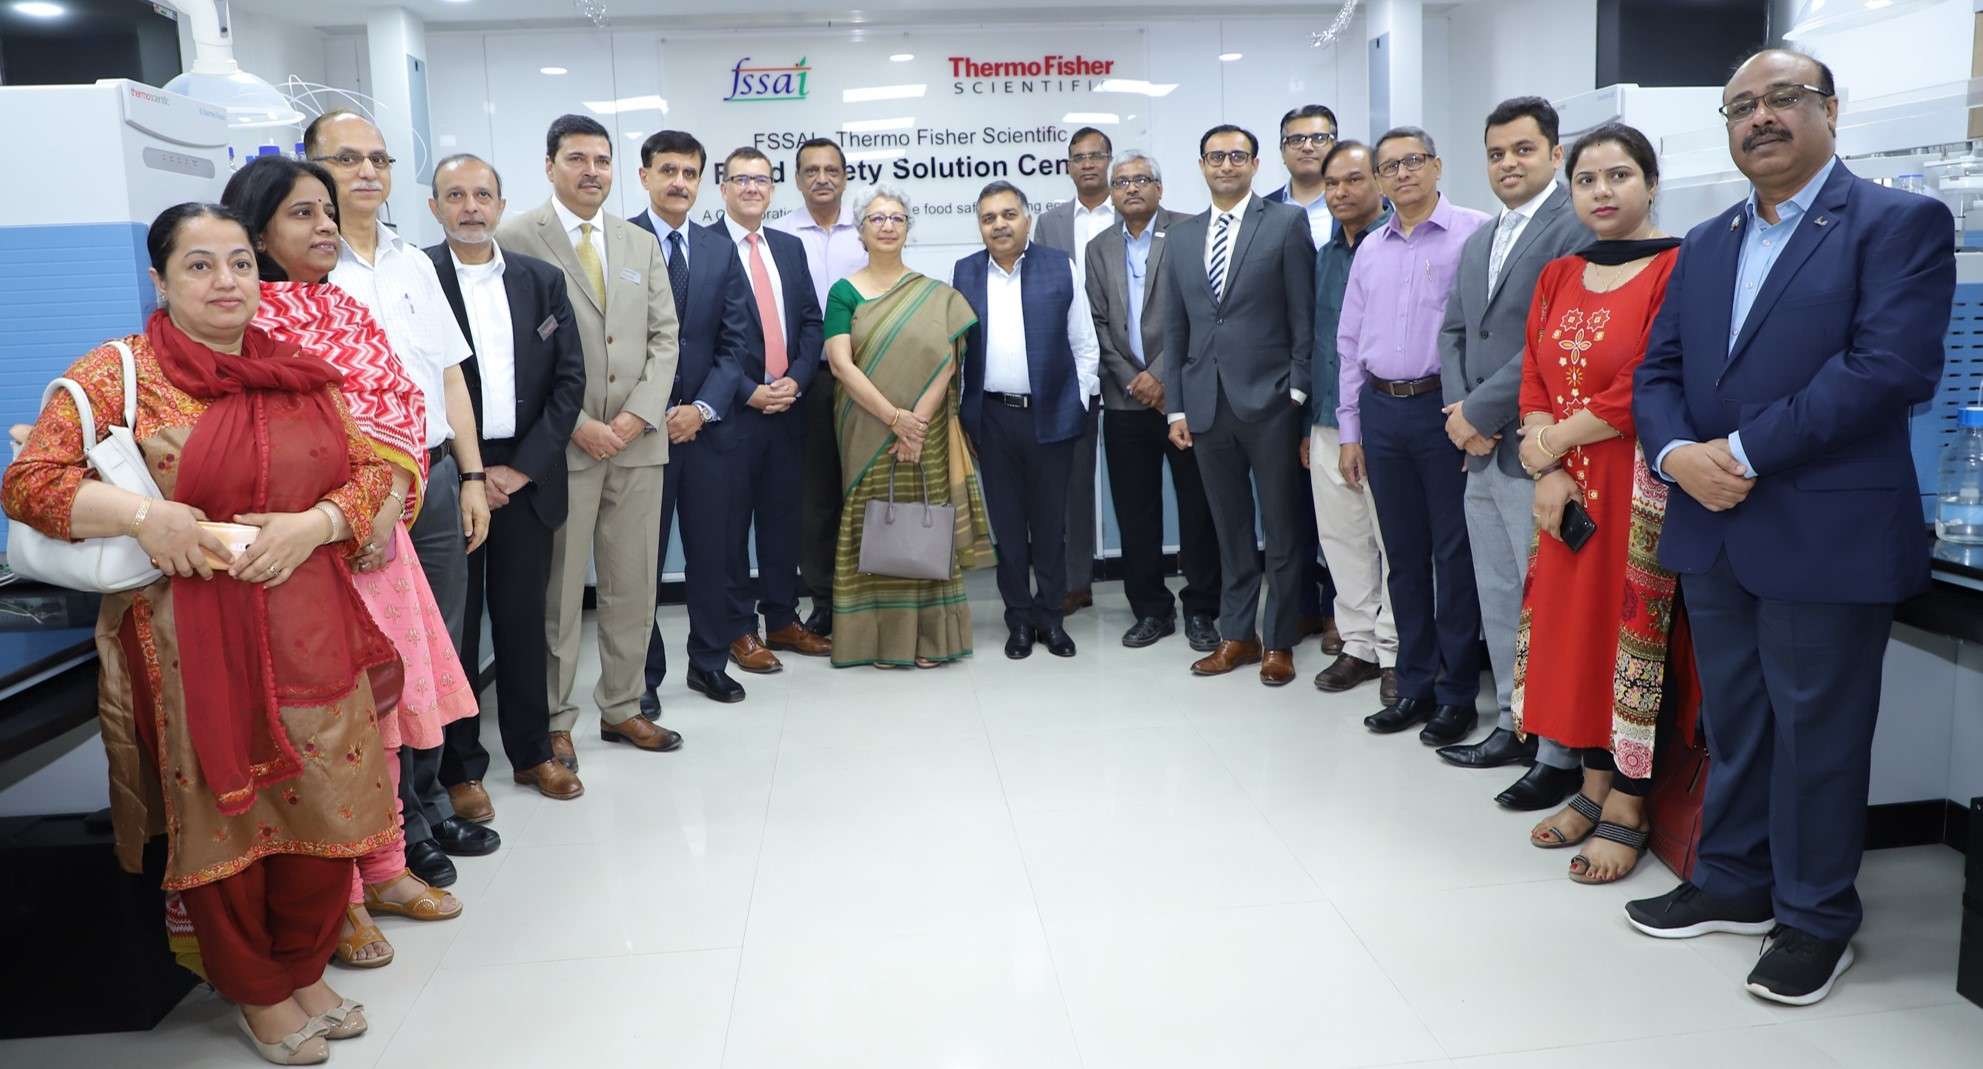 Thermo Fisher Scientific and FSSAI Partner to Open Advanced Food Safety  Solution Centre, ET HealthWorld